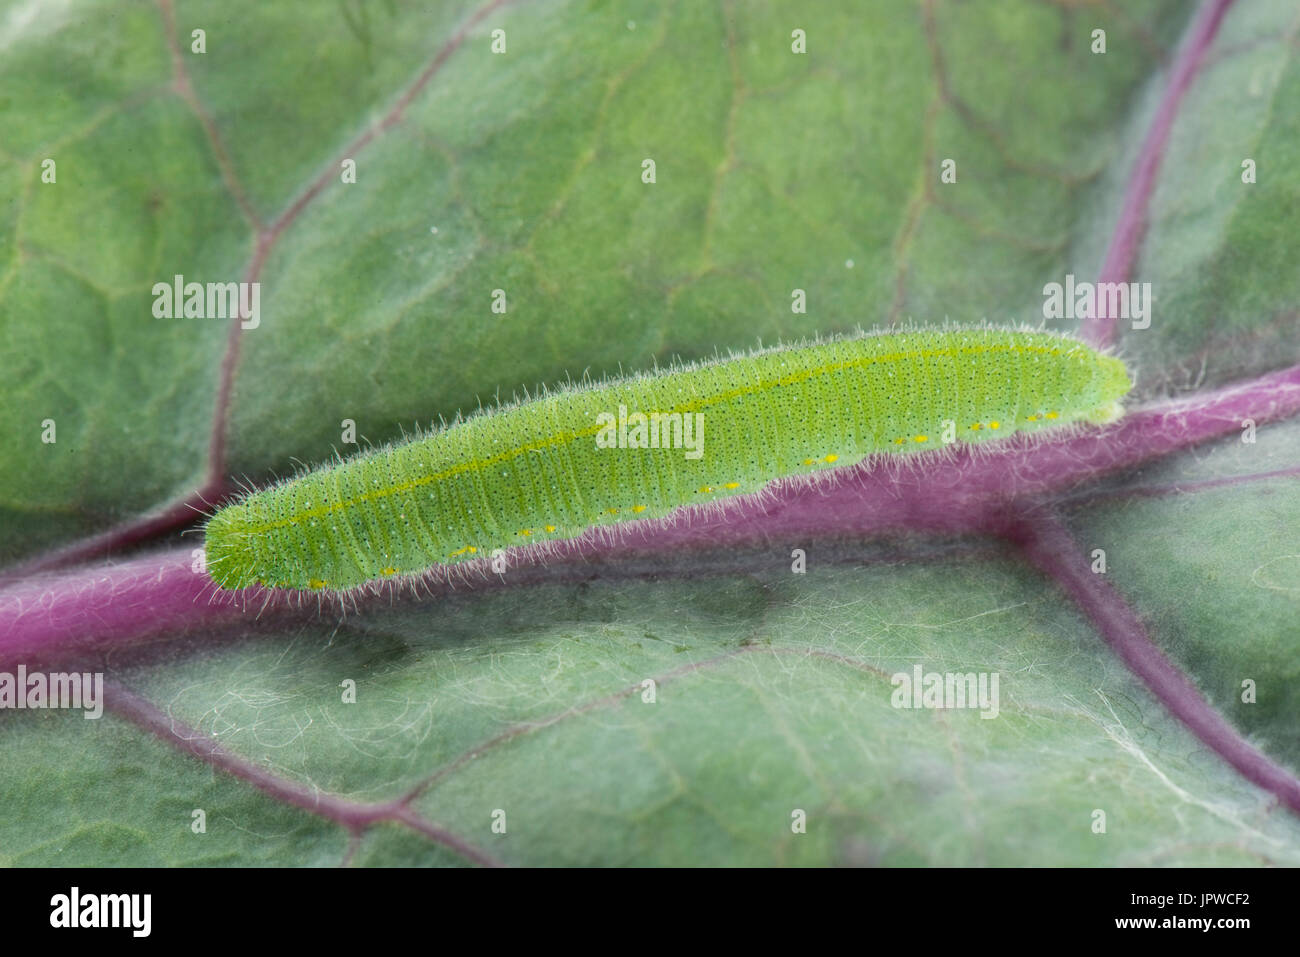 Small white butterfly, Pieris rapae, caterpillar feeding on the leaves of a purple variety of brussels sprouts, July Stock Photo